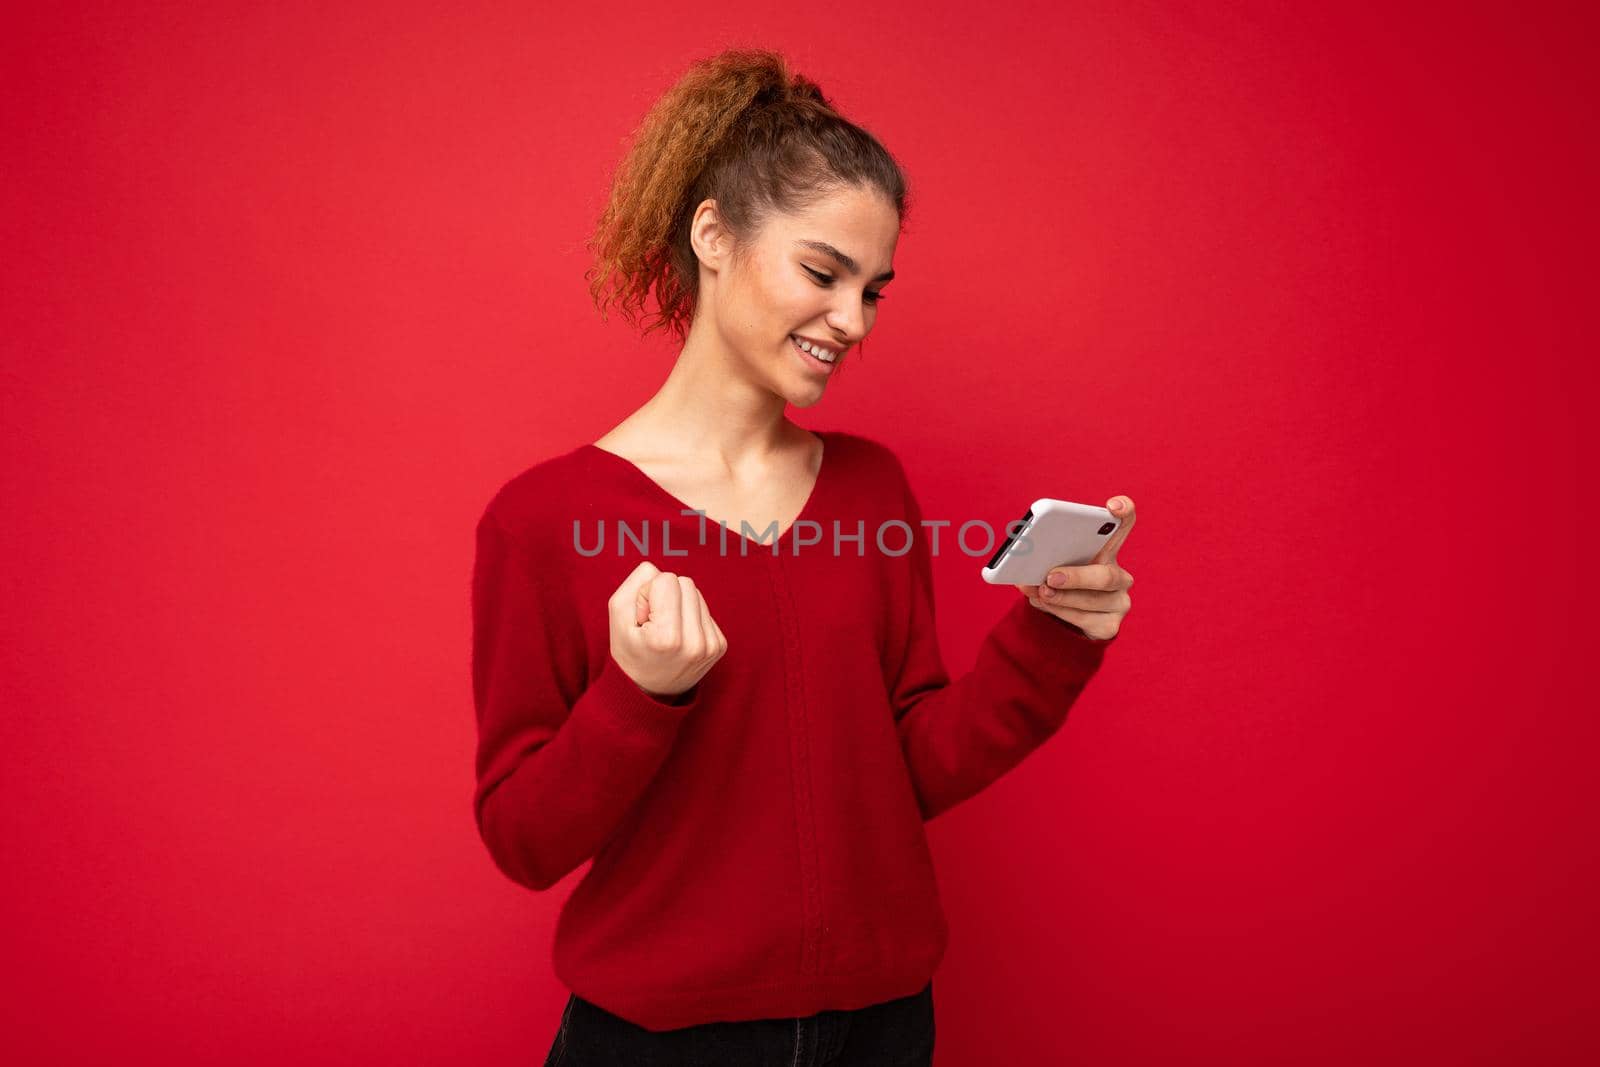 Cheerful woman standing isolated over red background, holding mobile phone, celebrating.